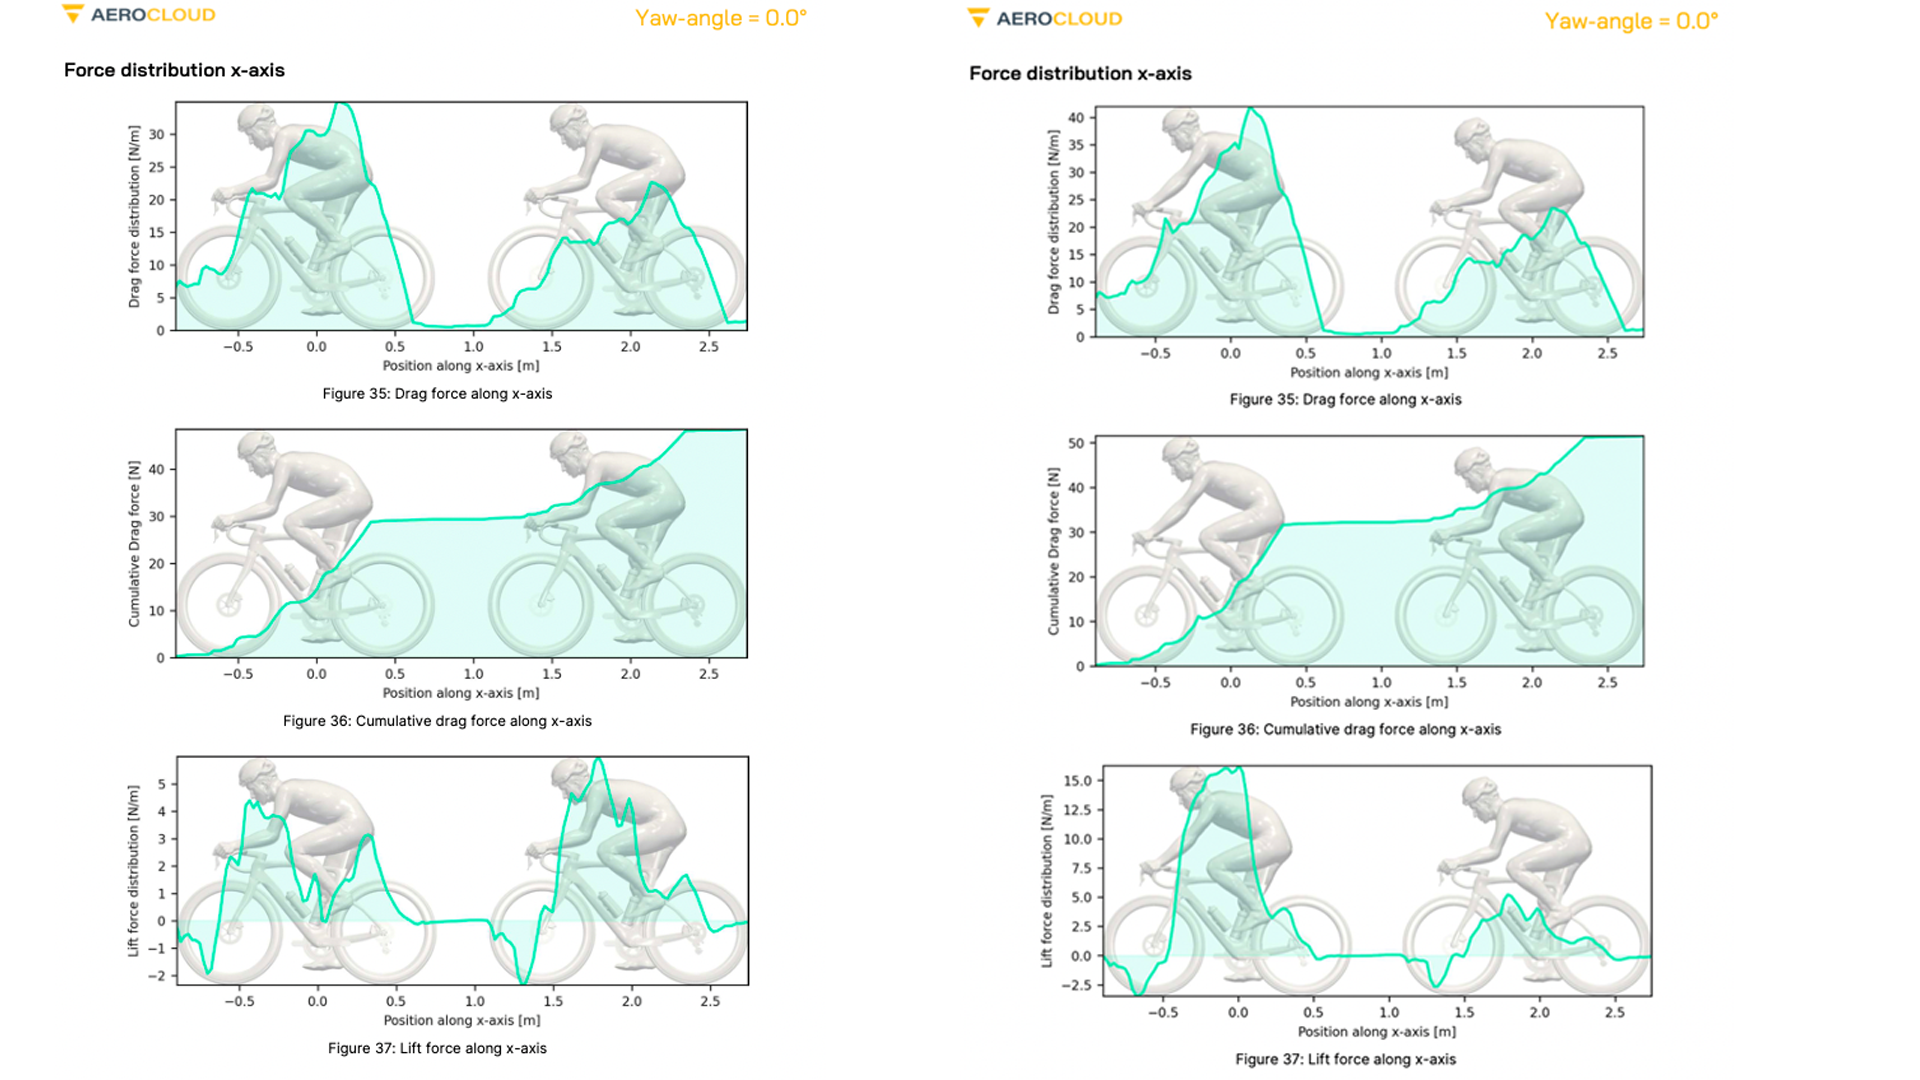 The image shows the force distribution for two cyclists based on CfD results for a simulation analysing the drag experienced by a following rider